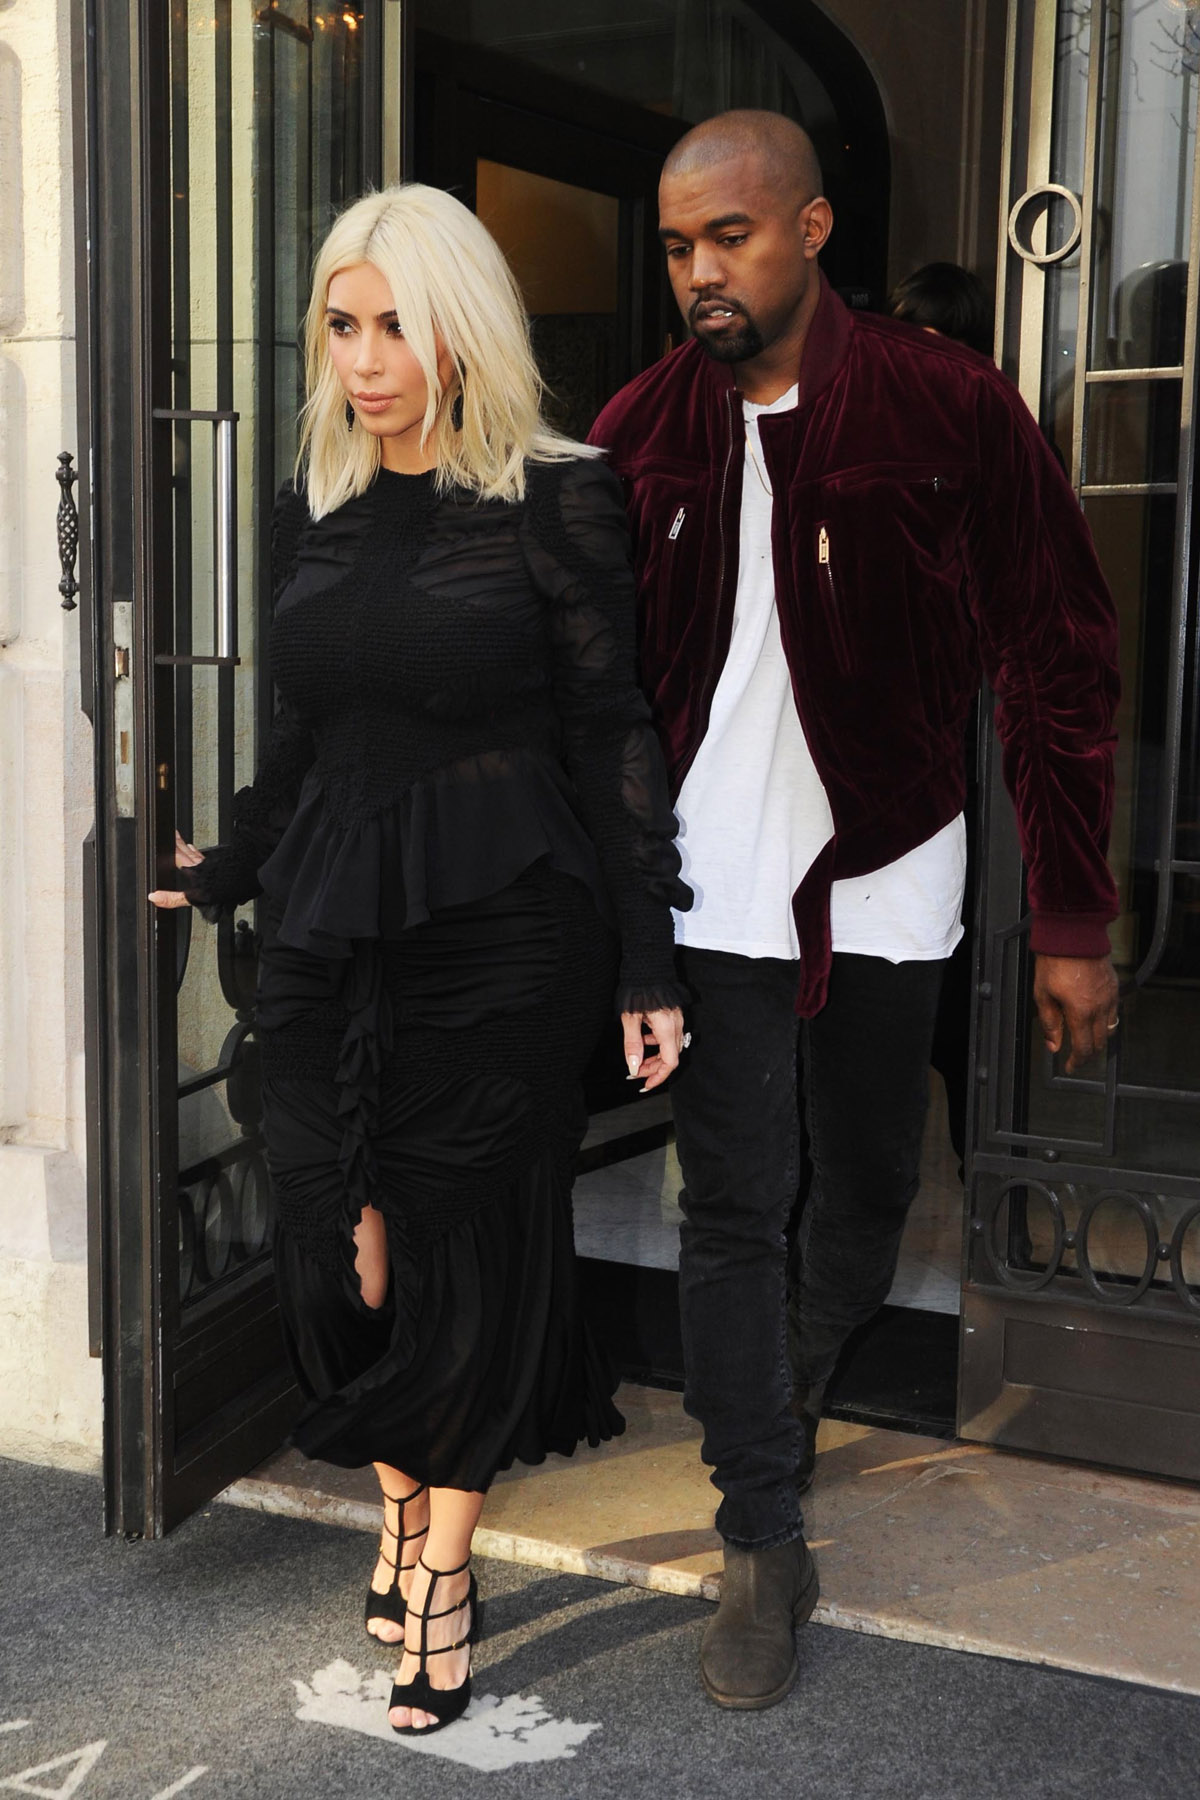 Kim Kardashian and Kanye West in and out of their hotel